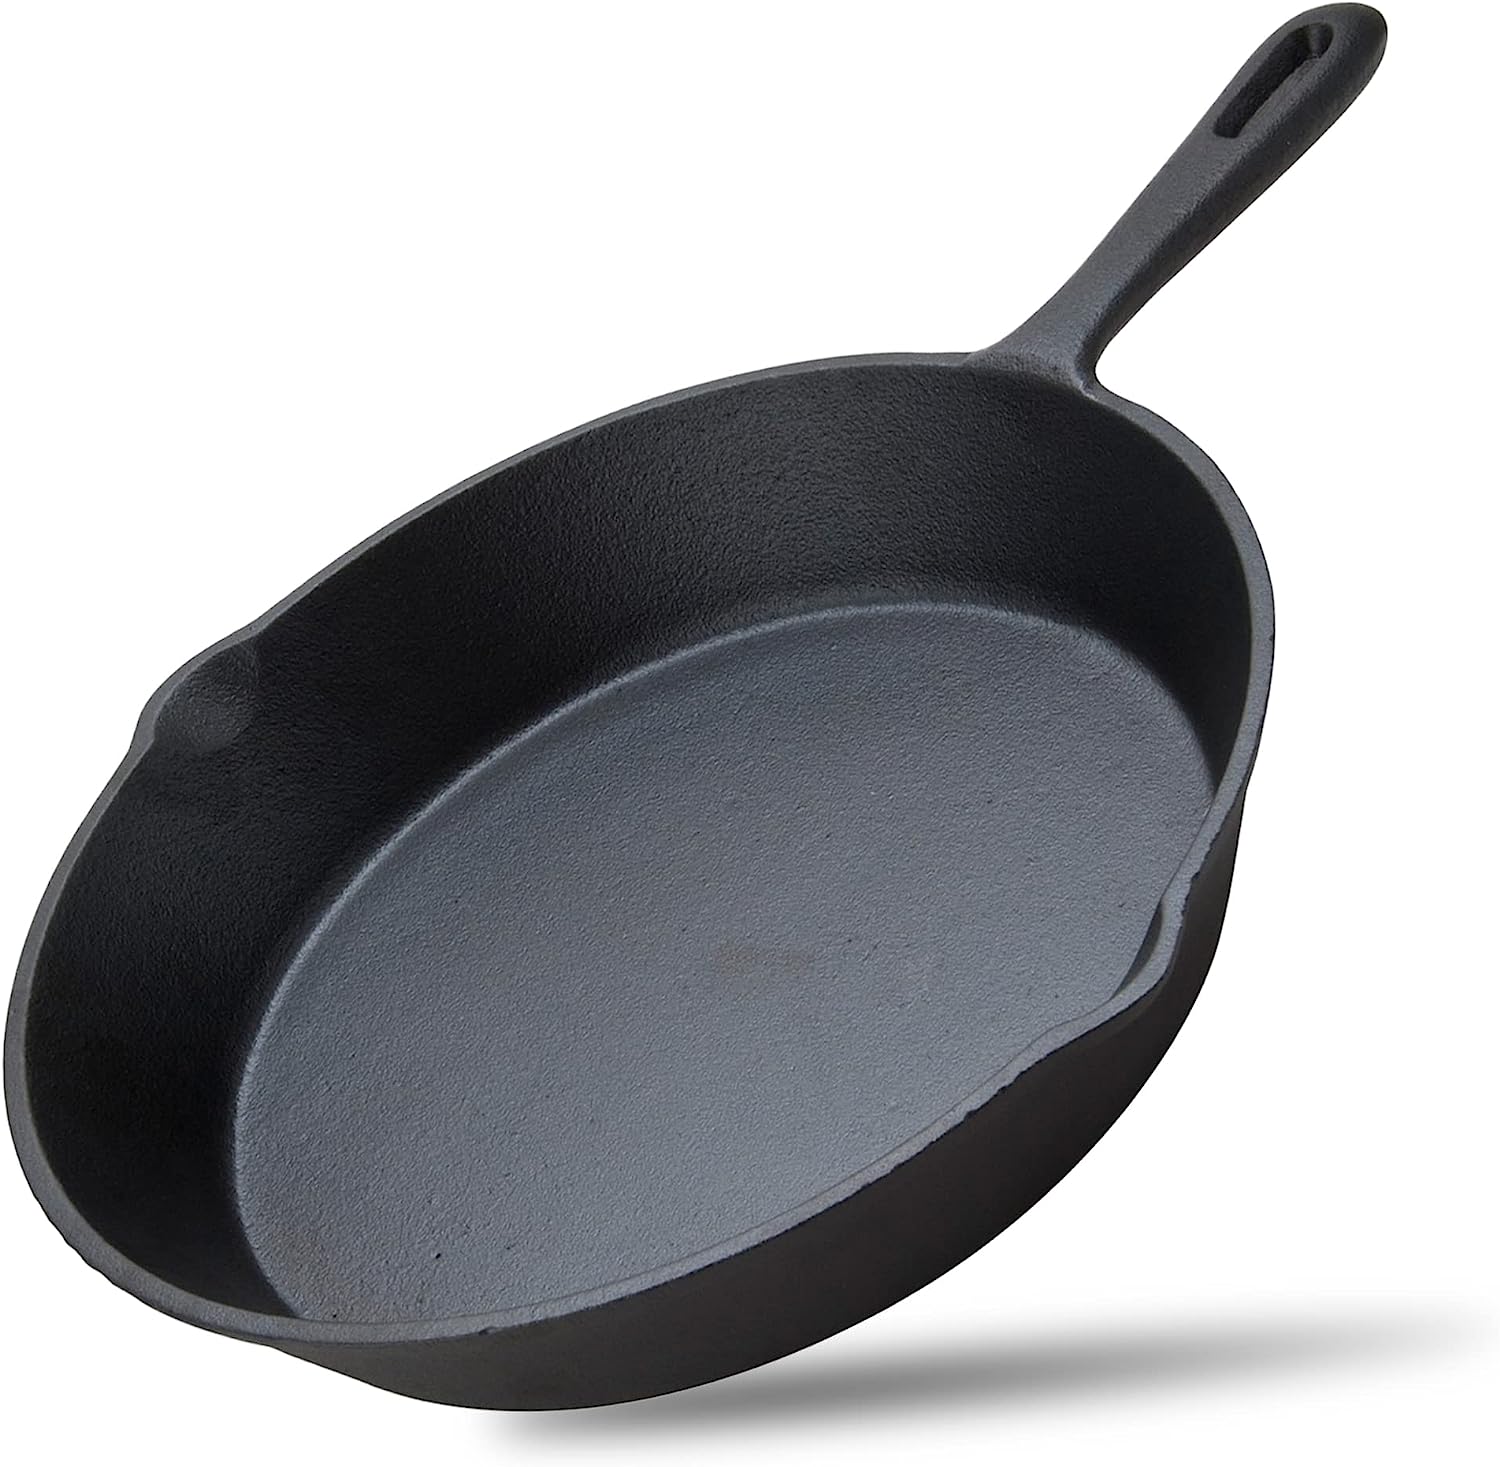 10inch 26cm Cast Iron Skillet Cookware Chef Quality Pre-Seasoned Pan Pans